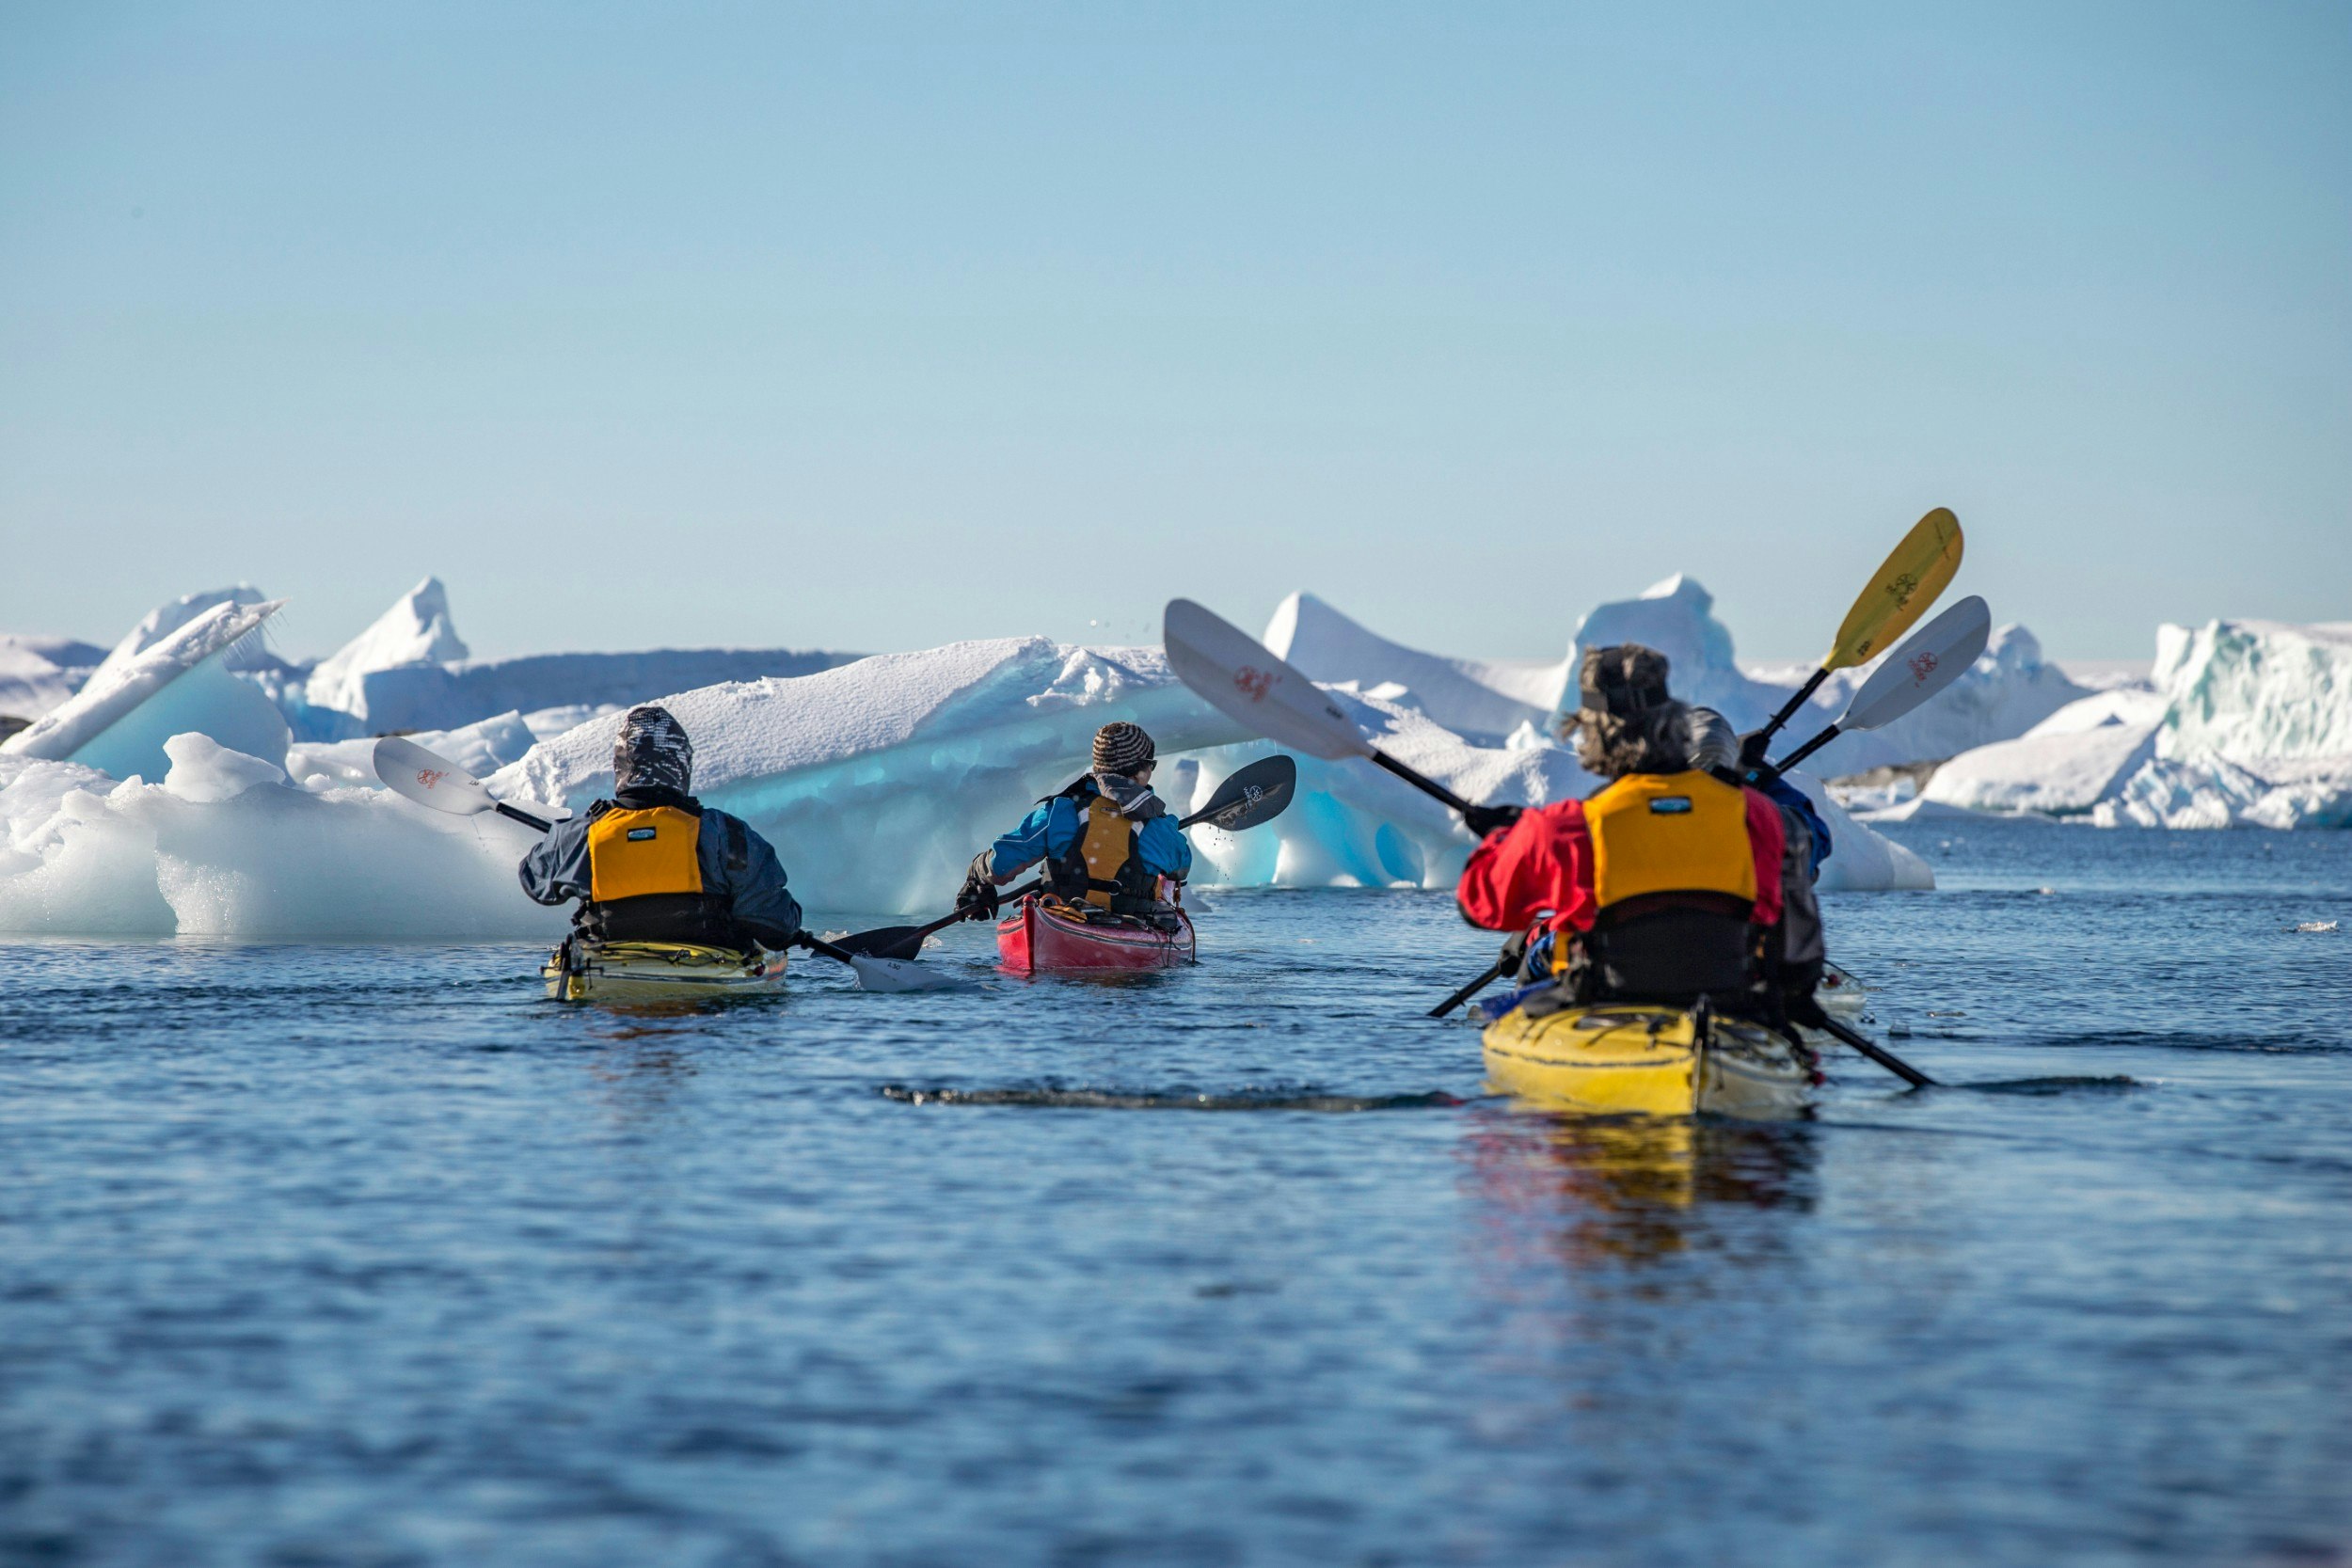 Kayakers in the water in the Antartic